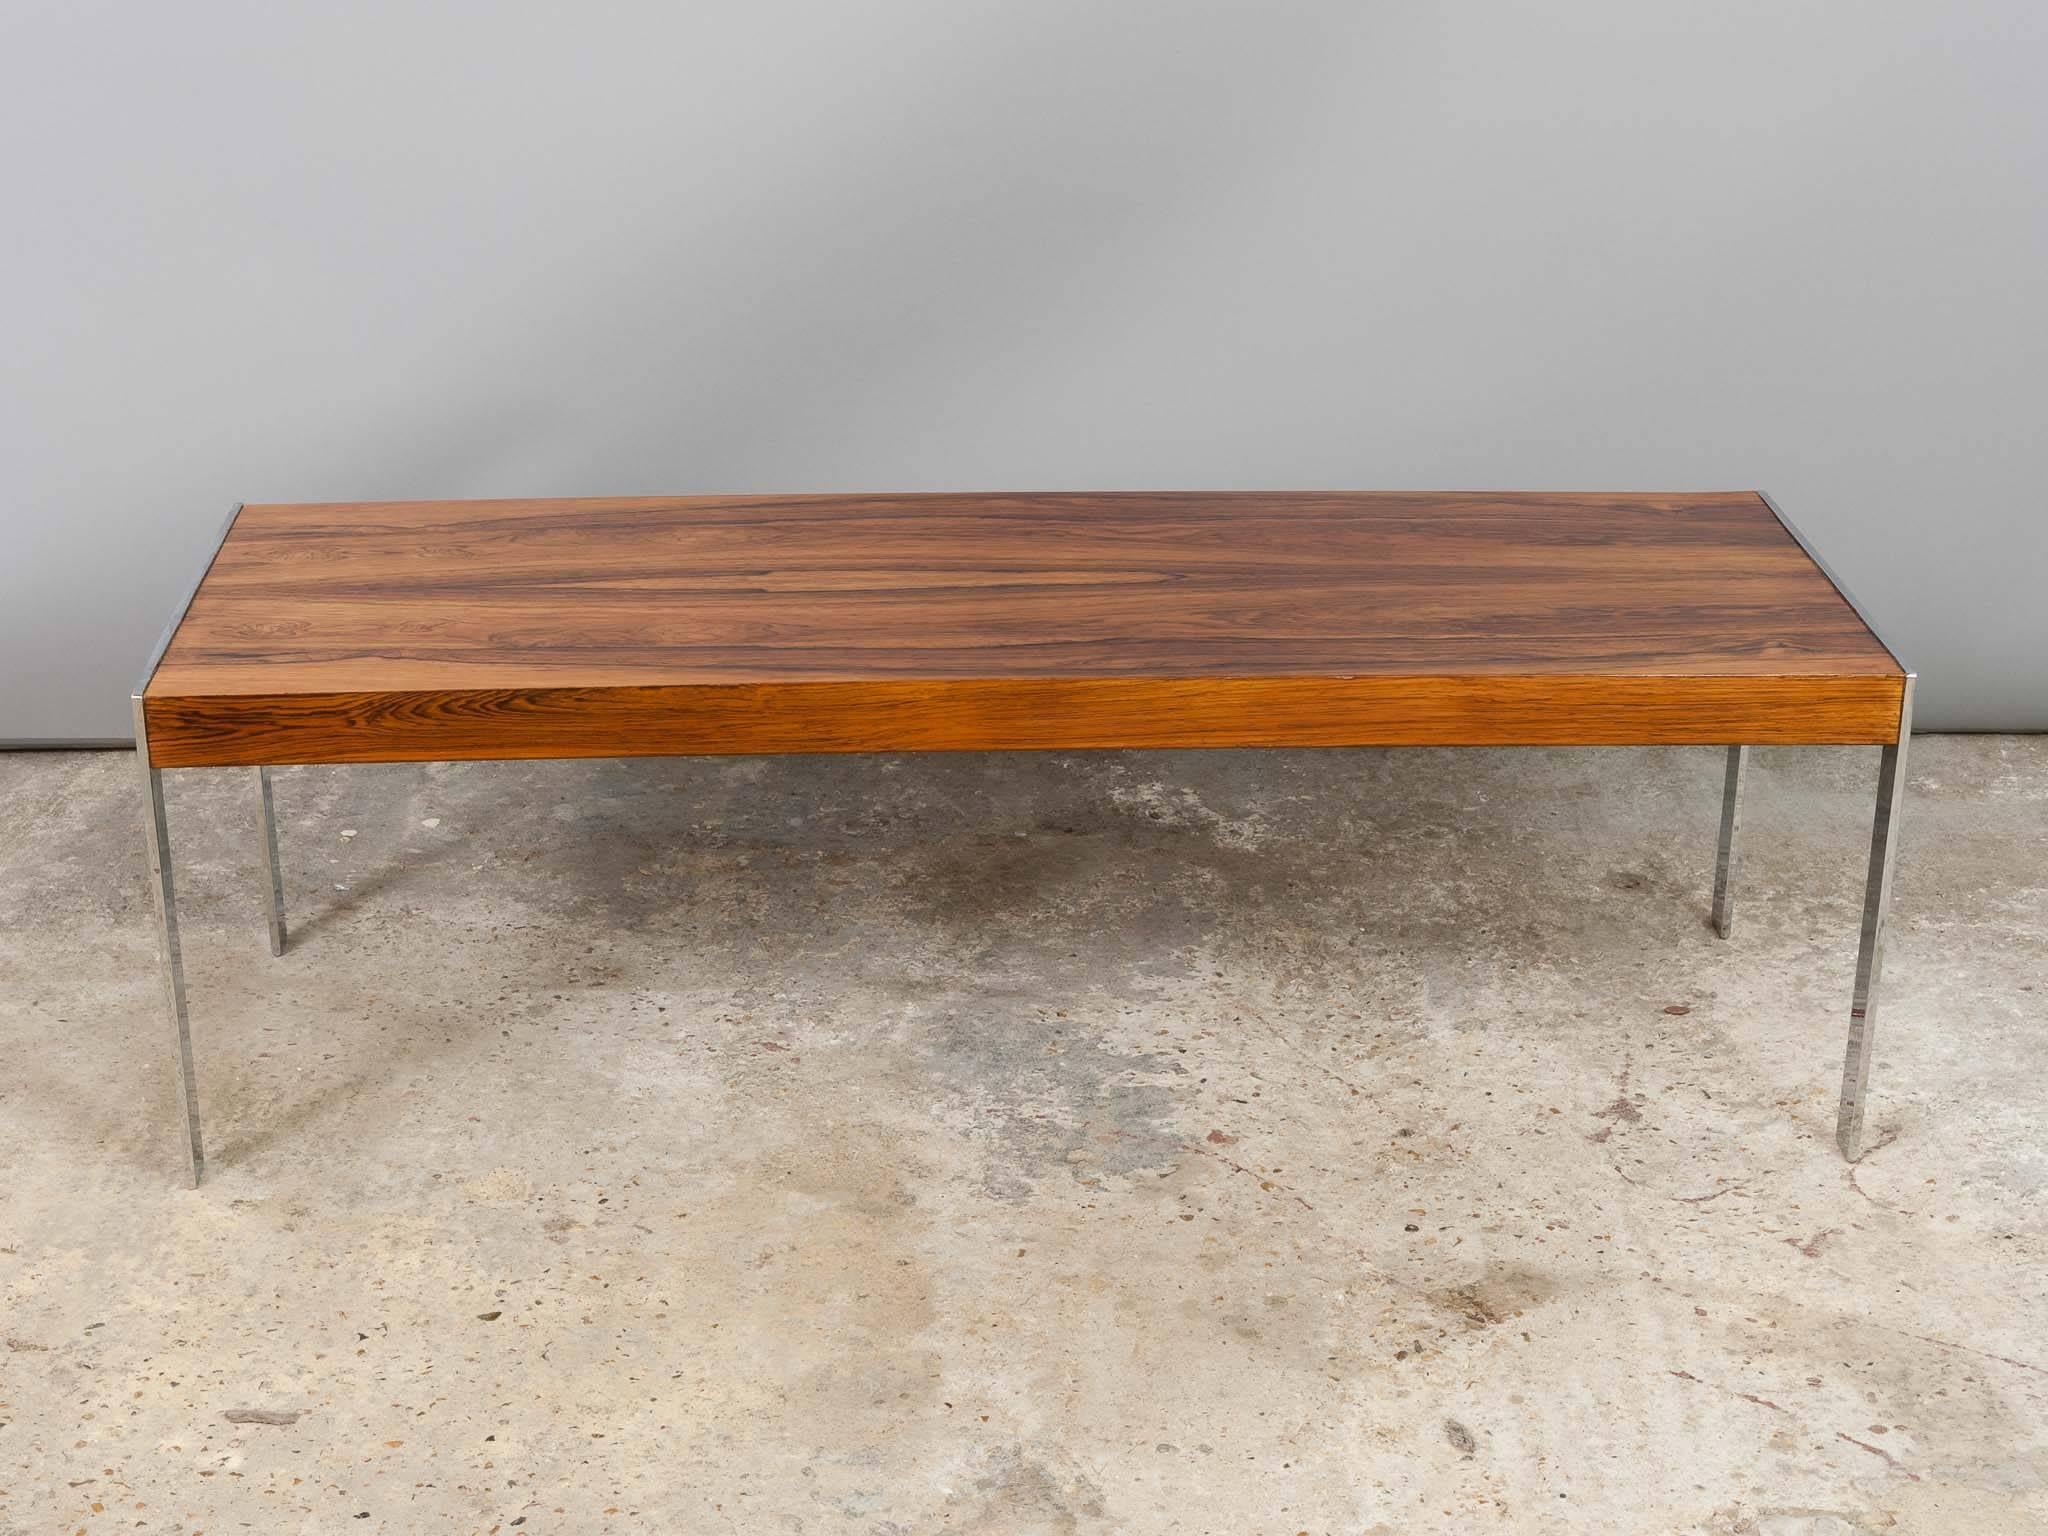 1970s Richard Young for Merrow associates rectangular Brazilian Rio rosewood veneered coffee table on chromed polished plated legs. Recently restored and in a beautiful vintage condition.